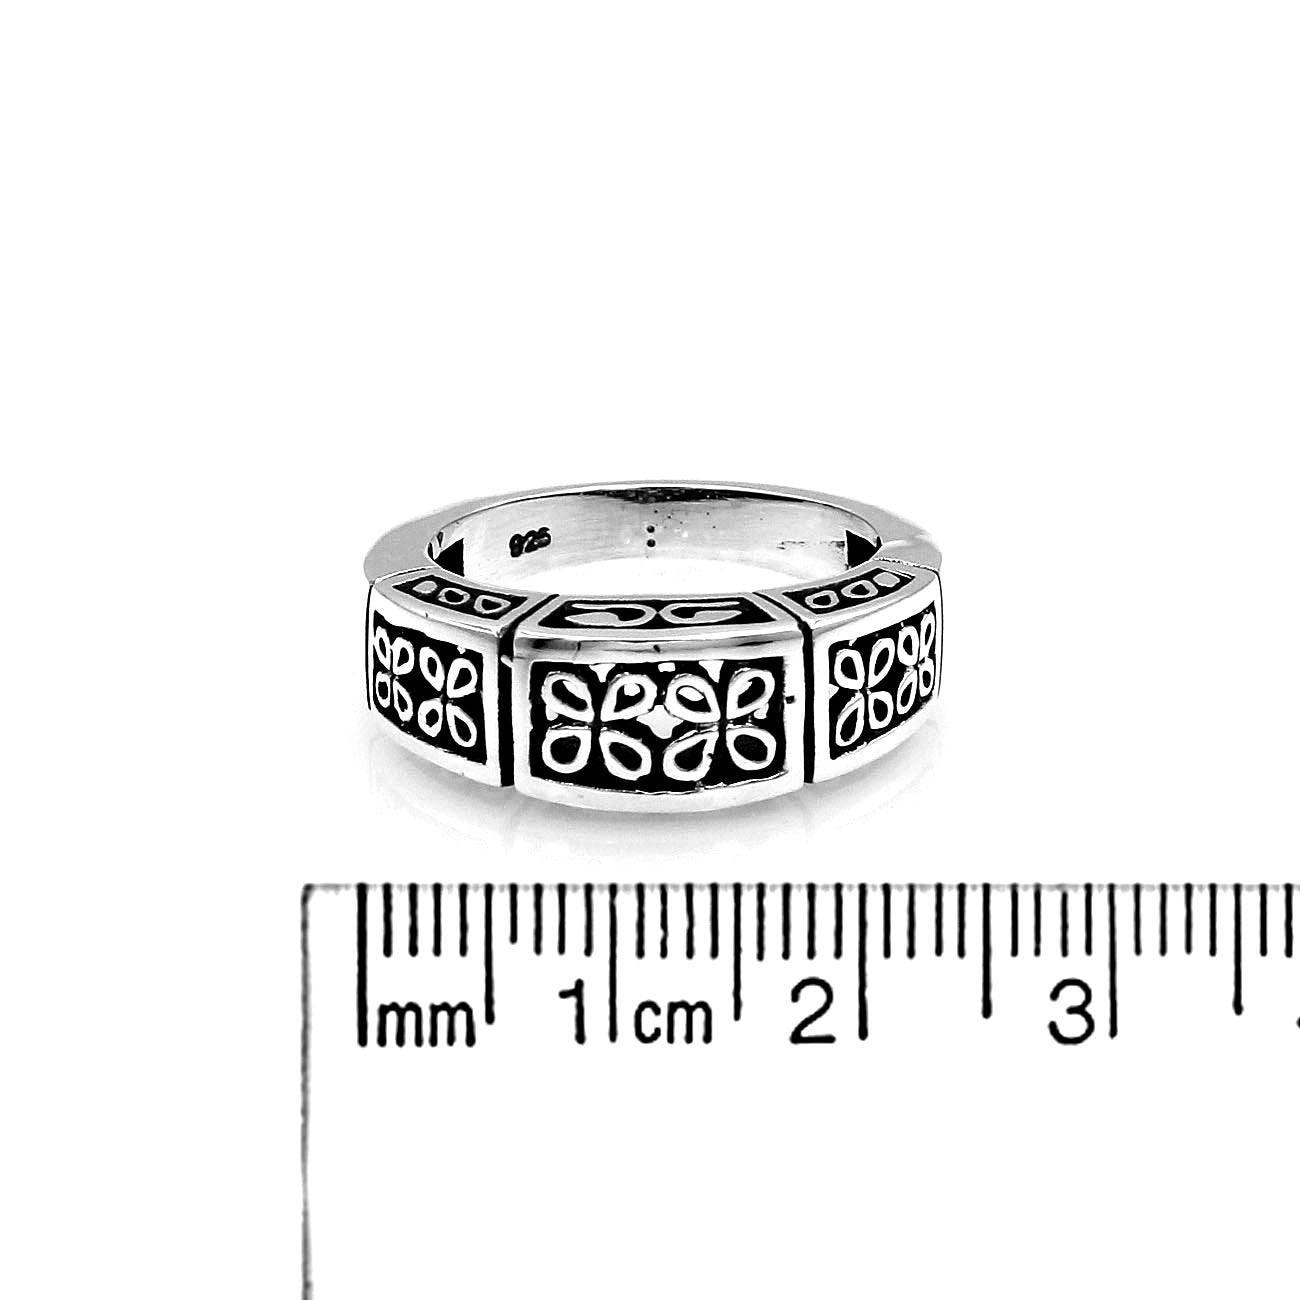 Handmade BALI Floral Stackable BAND Ring in 925 Sterling Silver - Size L , M , N , O , P , Q - Inspiring Jewellery